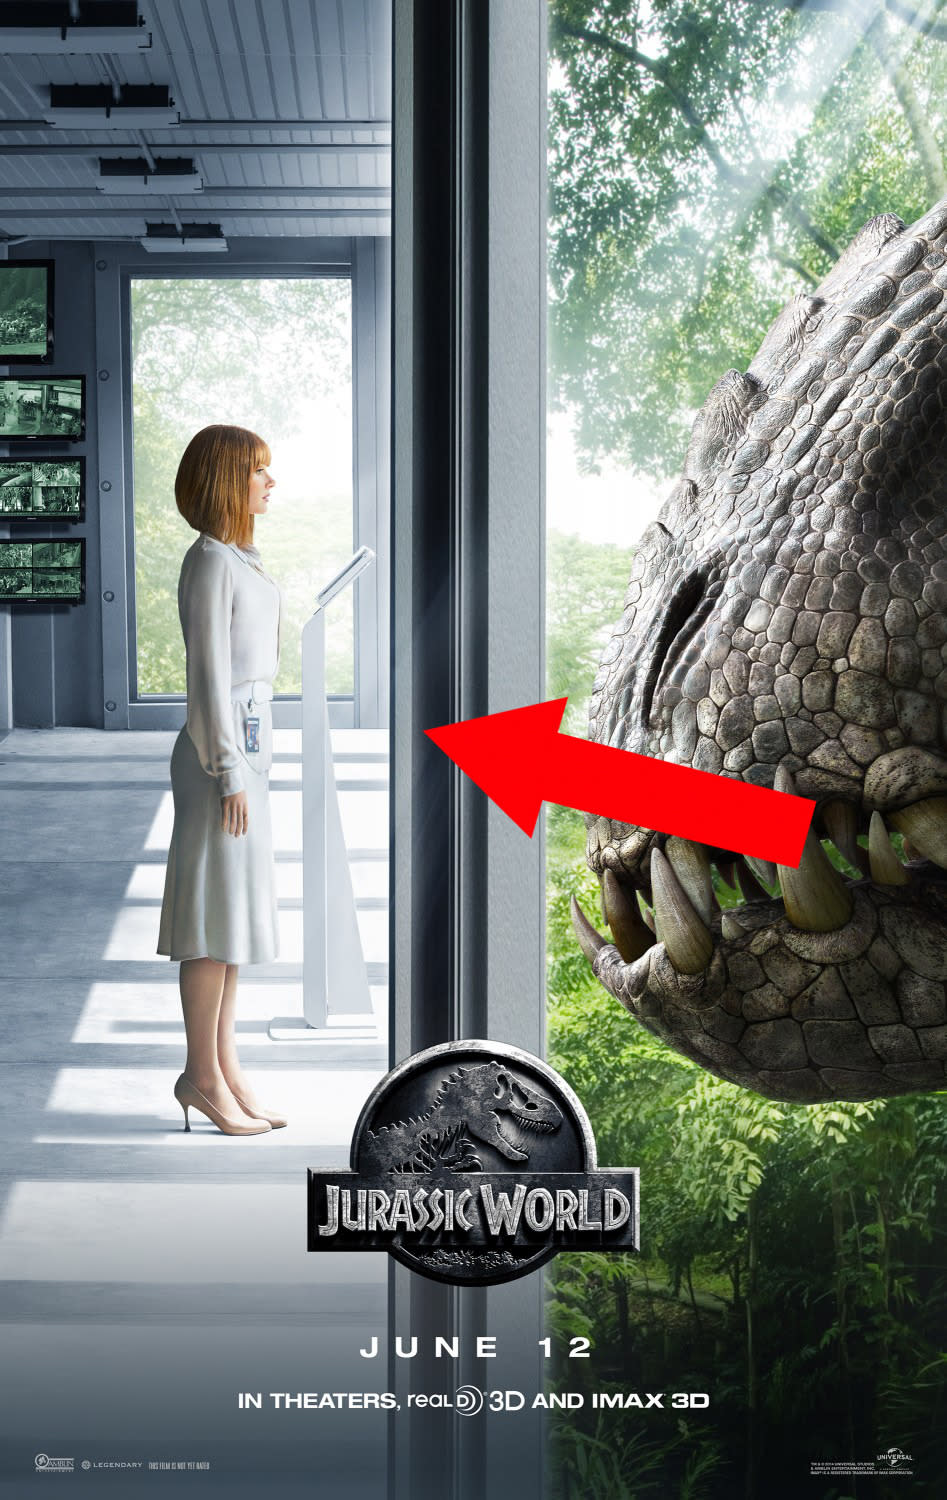 Jurassic World: Let’s get some perspective on this, guys. No, literally, let’s get some perspective. That floor Bryce Dallas Howard is standing on is all wrong, if you look at how the Indominus Rex is looking in through the window.